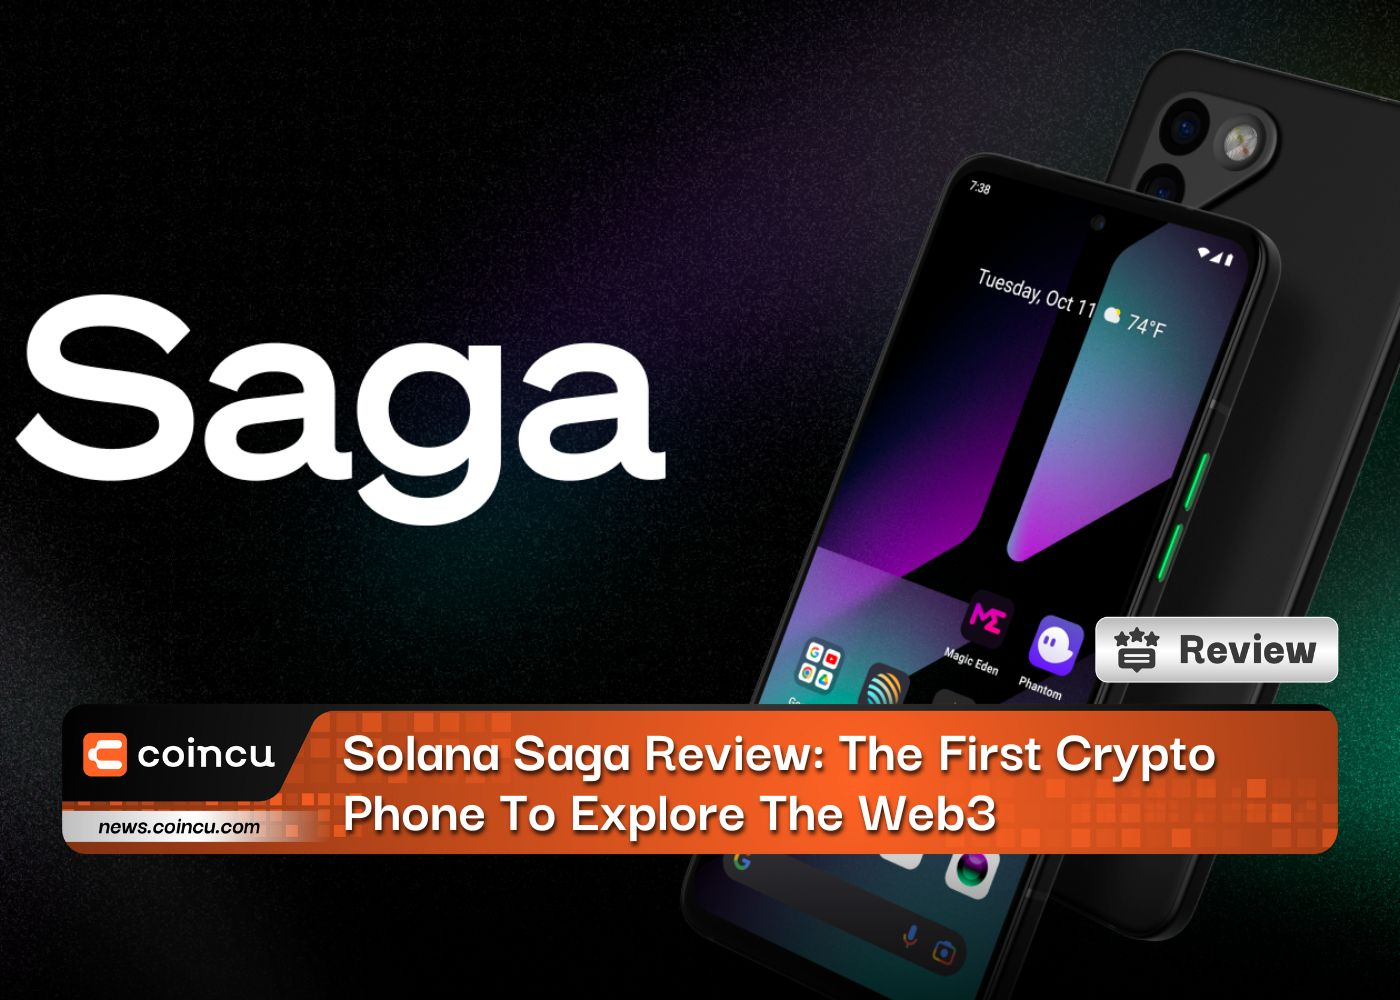 Solana Saga Review: The First Crypto Phone To Explore The Web3